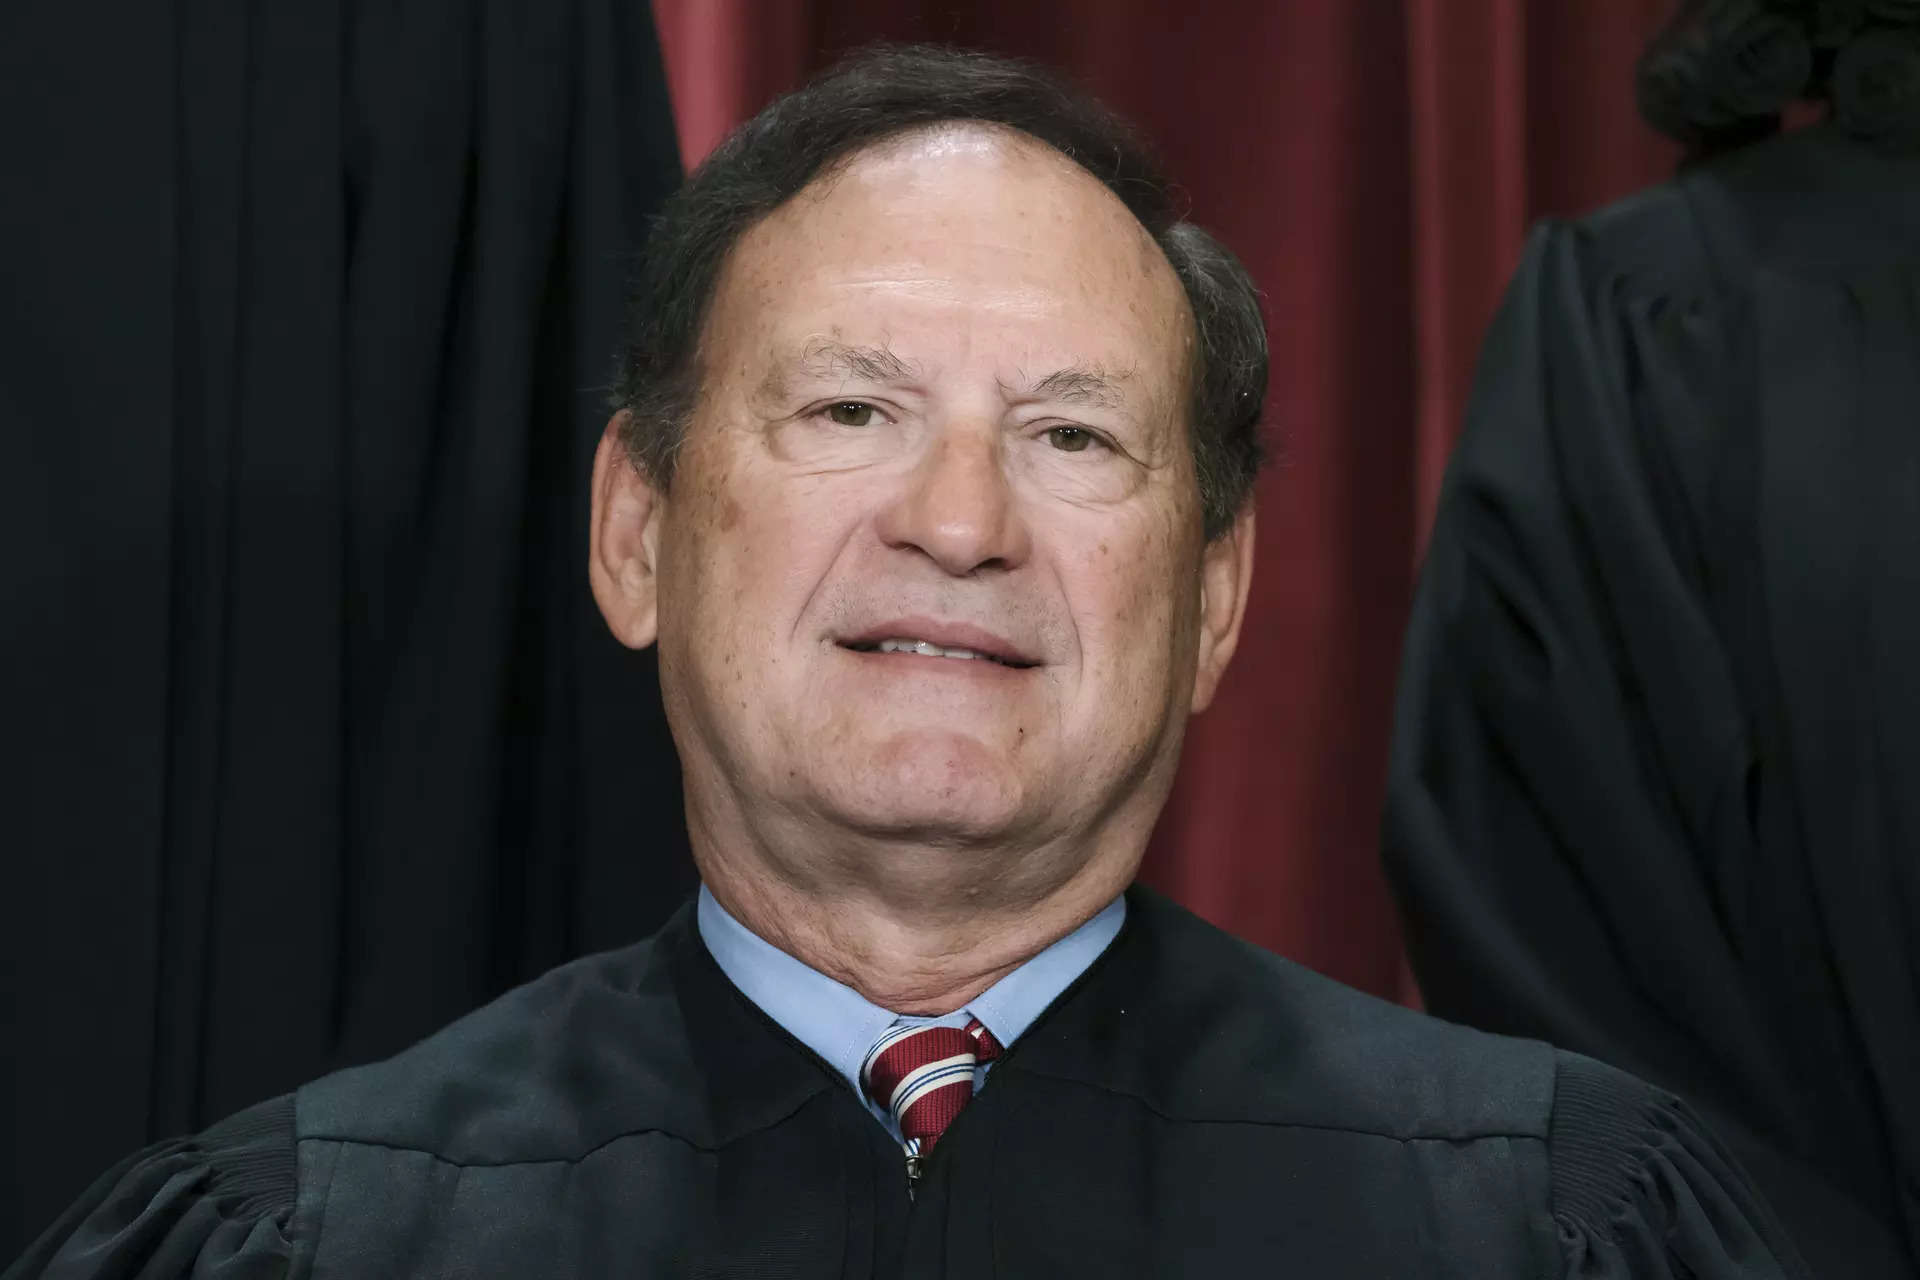 US Supreme Court Justice Samuel Alito rejects Democrats’ calls to step away from Trump cases